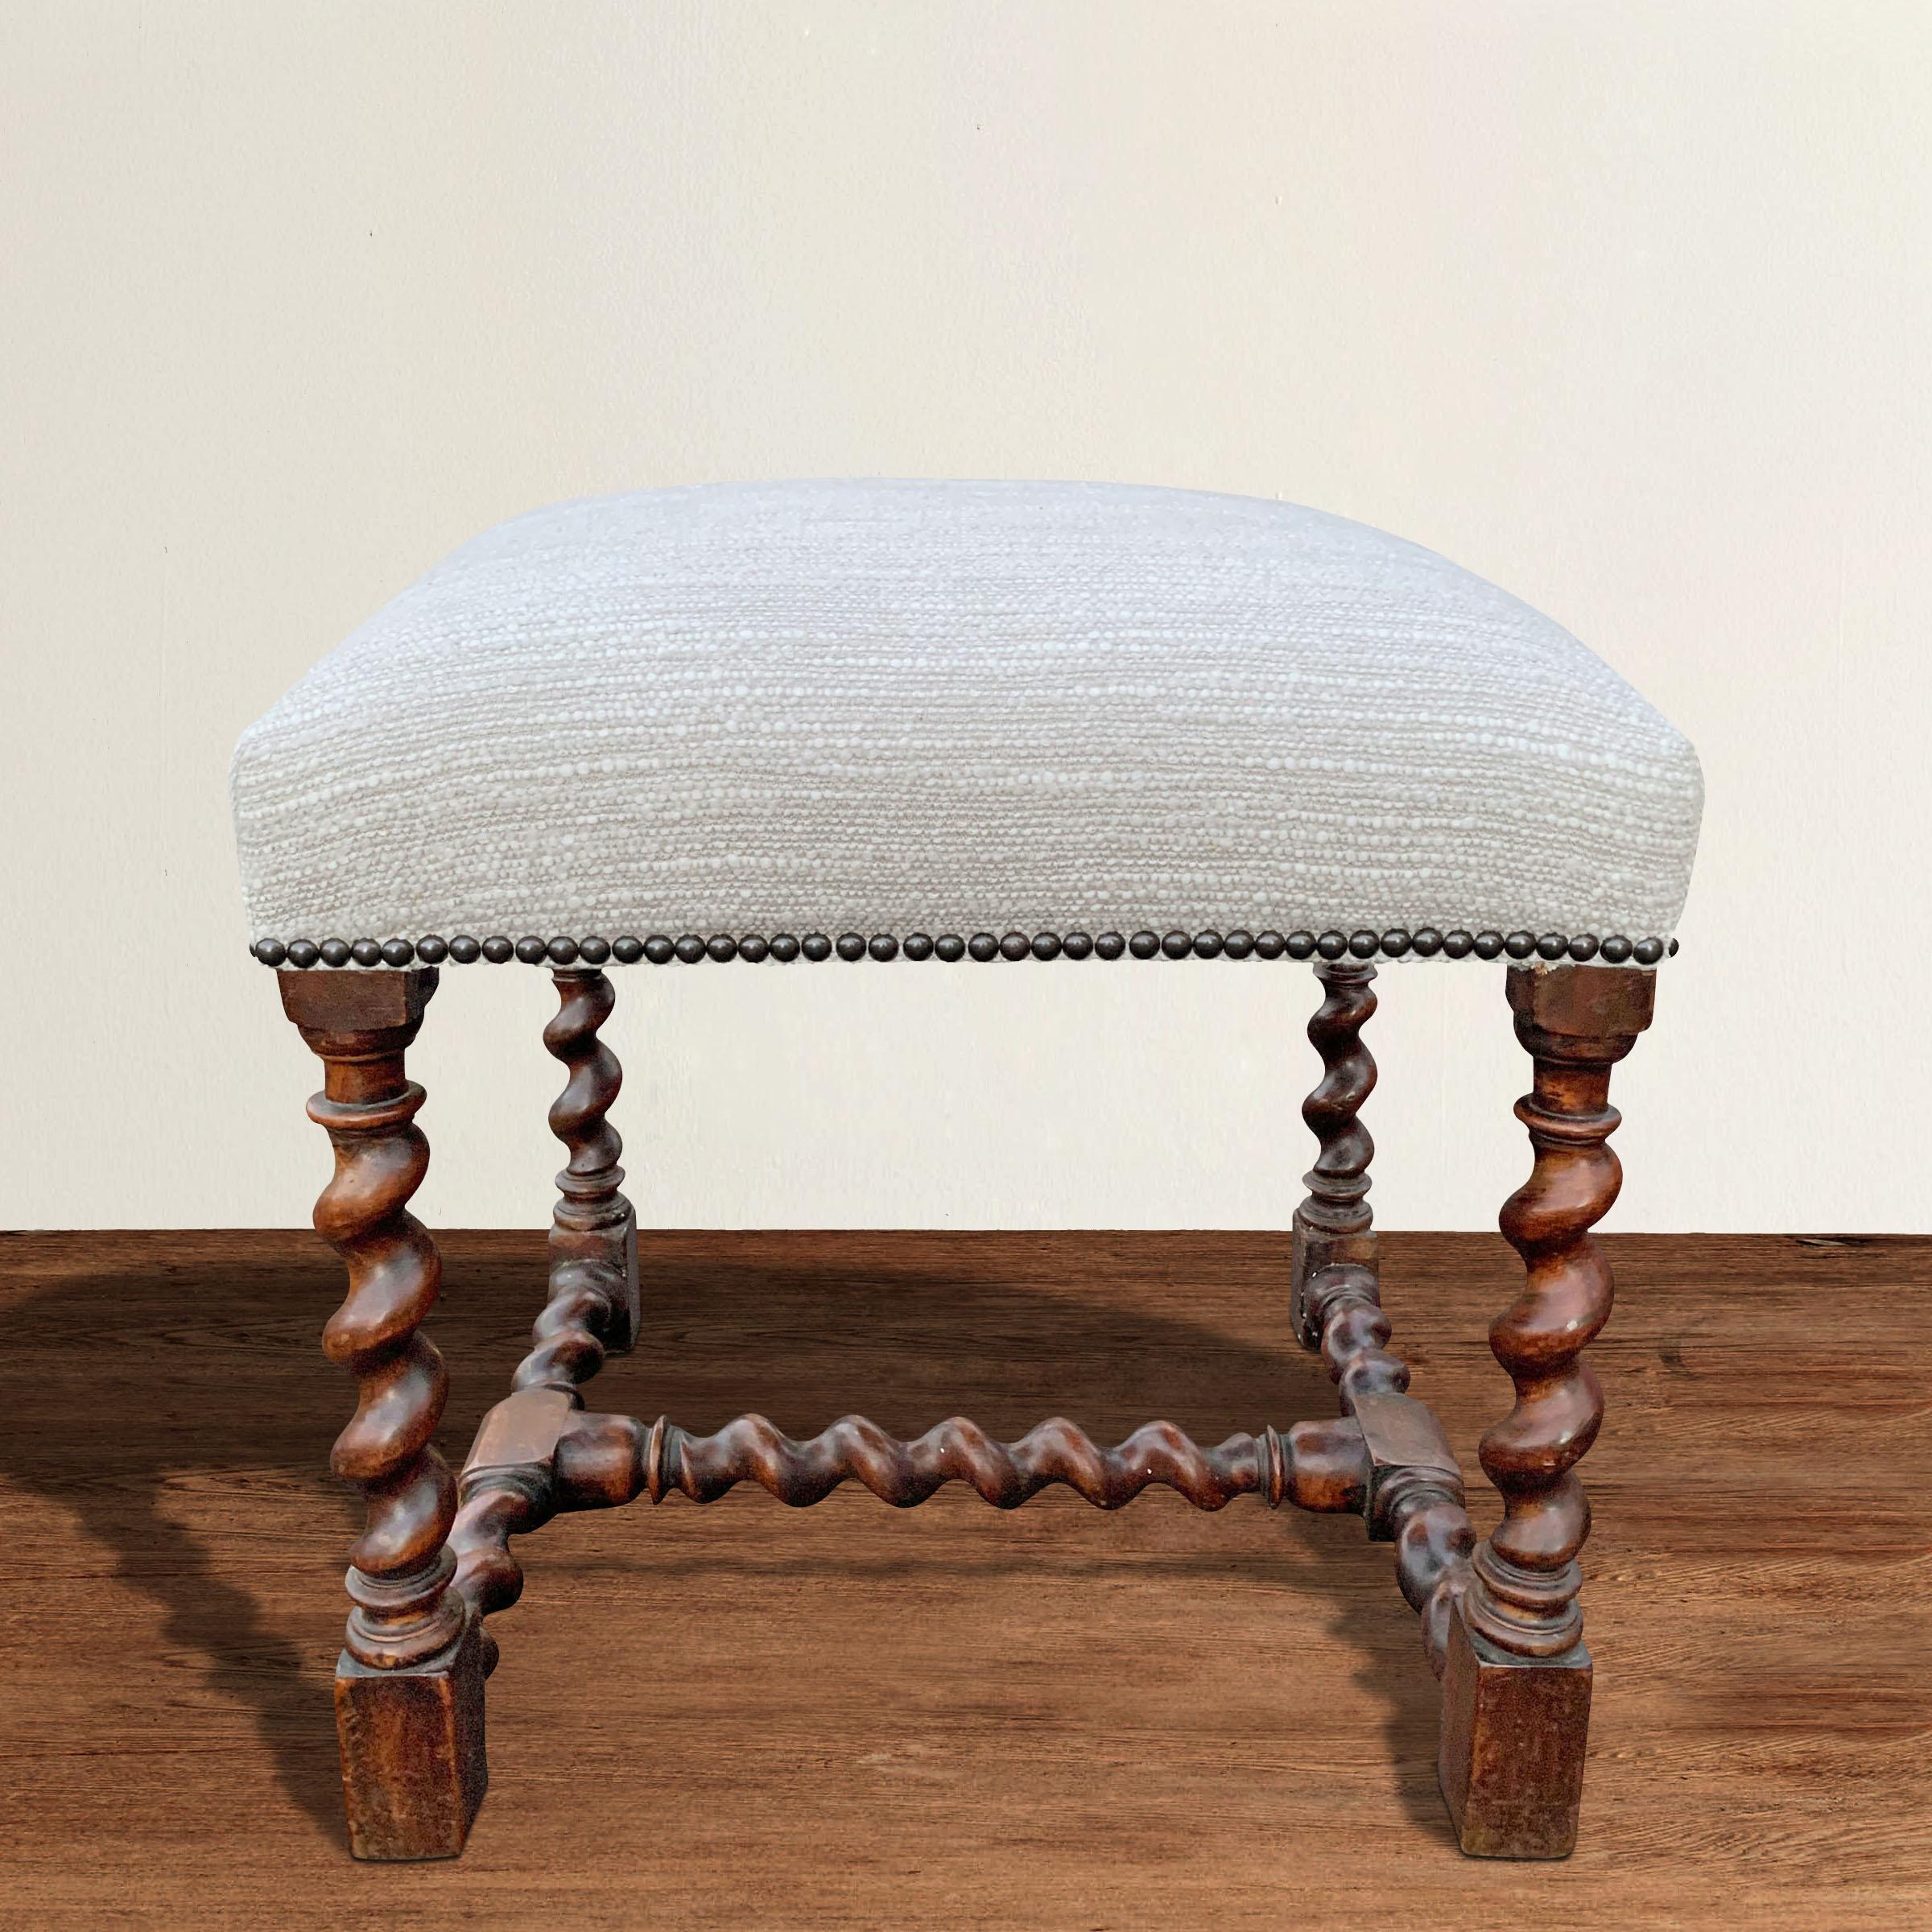 A gorgeous 17th century French Louis XIII walnut stool with barley twist legs and stretchers, and newly upholstered in a wool and linen bouclé. Perfect for tucking under a console table or nightstand, but also functions as a soft side table next to